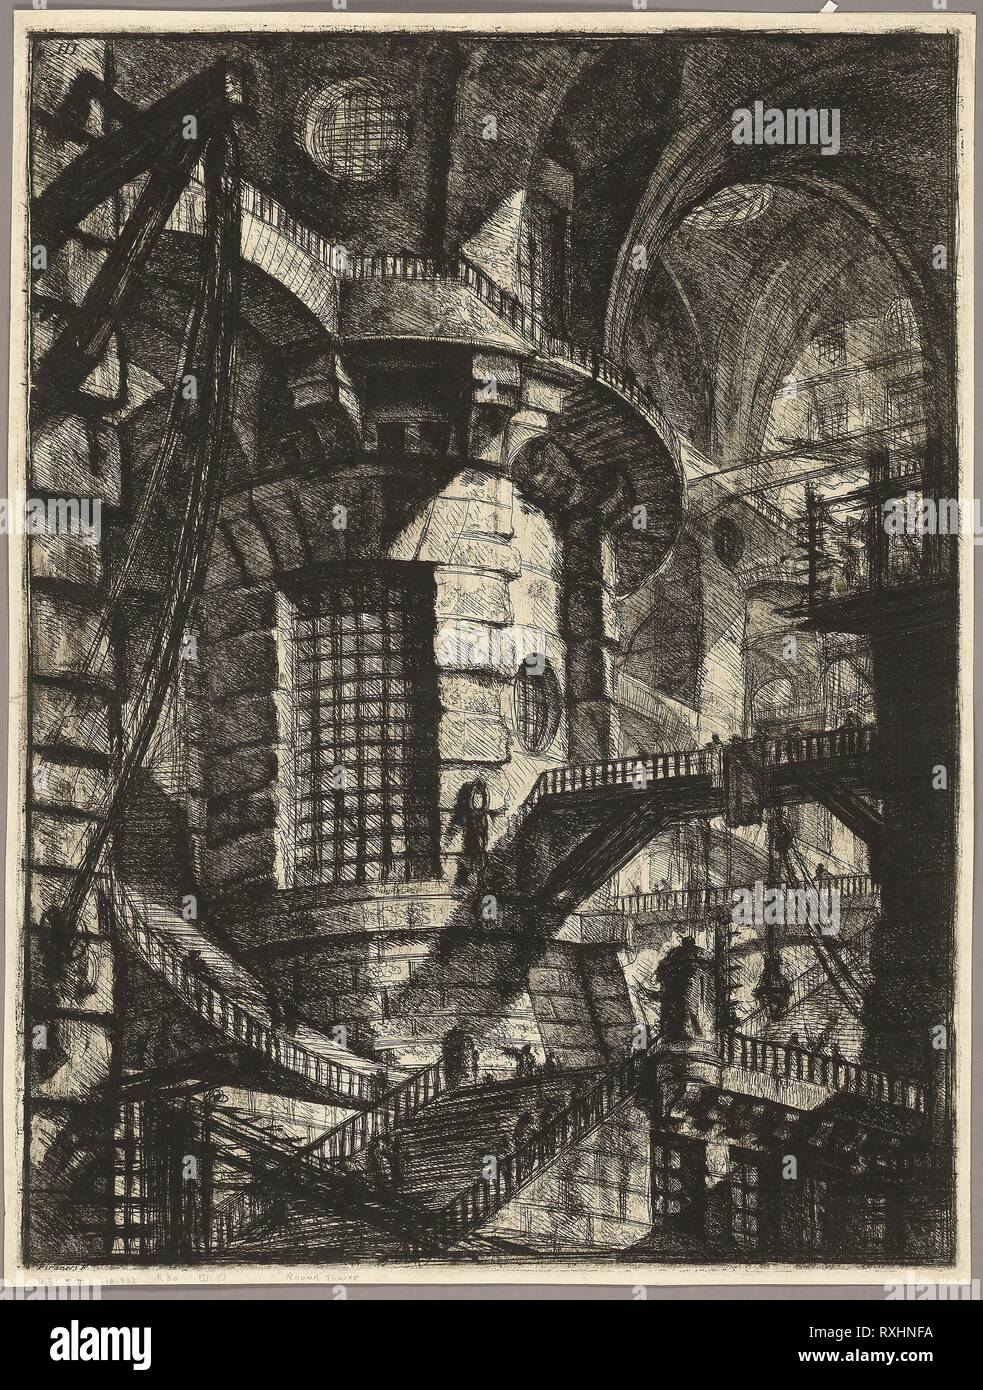 The Round Tower, plate 3 from the second edition of Carceri d'invenzione (Imaginary Prisons). Giovanni Battista Piranesi; Italian, 1720-1778. Date: 1761-1765. Dimensions: 542 x 410 mm (image); 549 x 416 mm (plate); 561 x 425 mm (sheet). Etching, engraving, sulphur tint, and burnishing in black on ivory laid paper. Origin: Italy. Museum: The Chicago Art Institute. Stock Photo